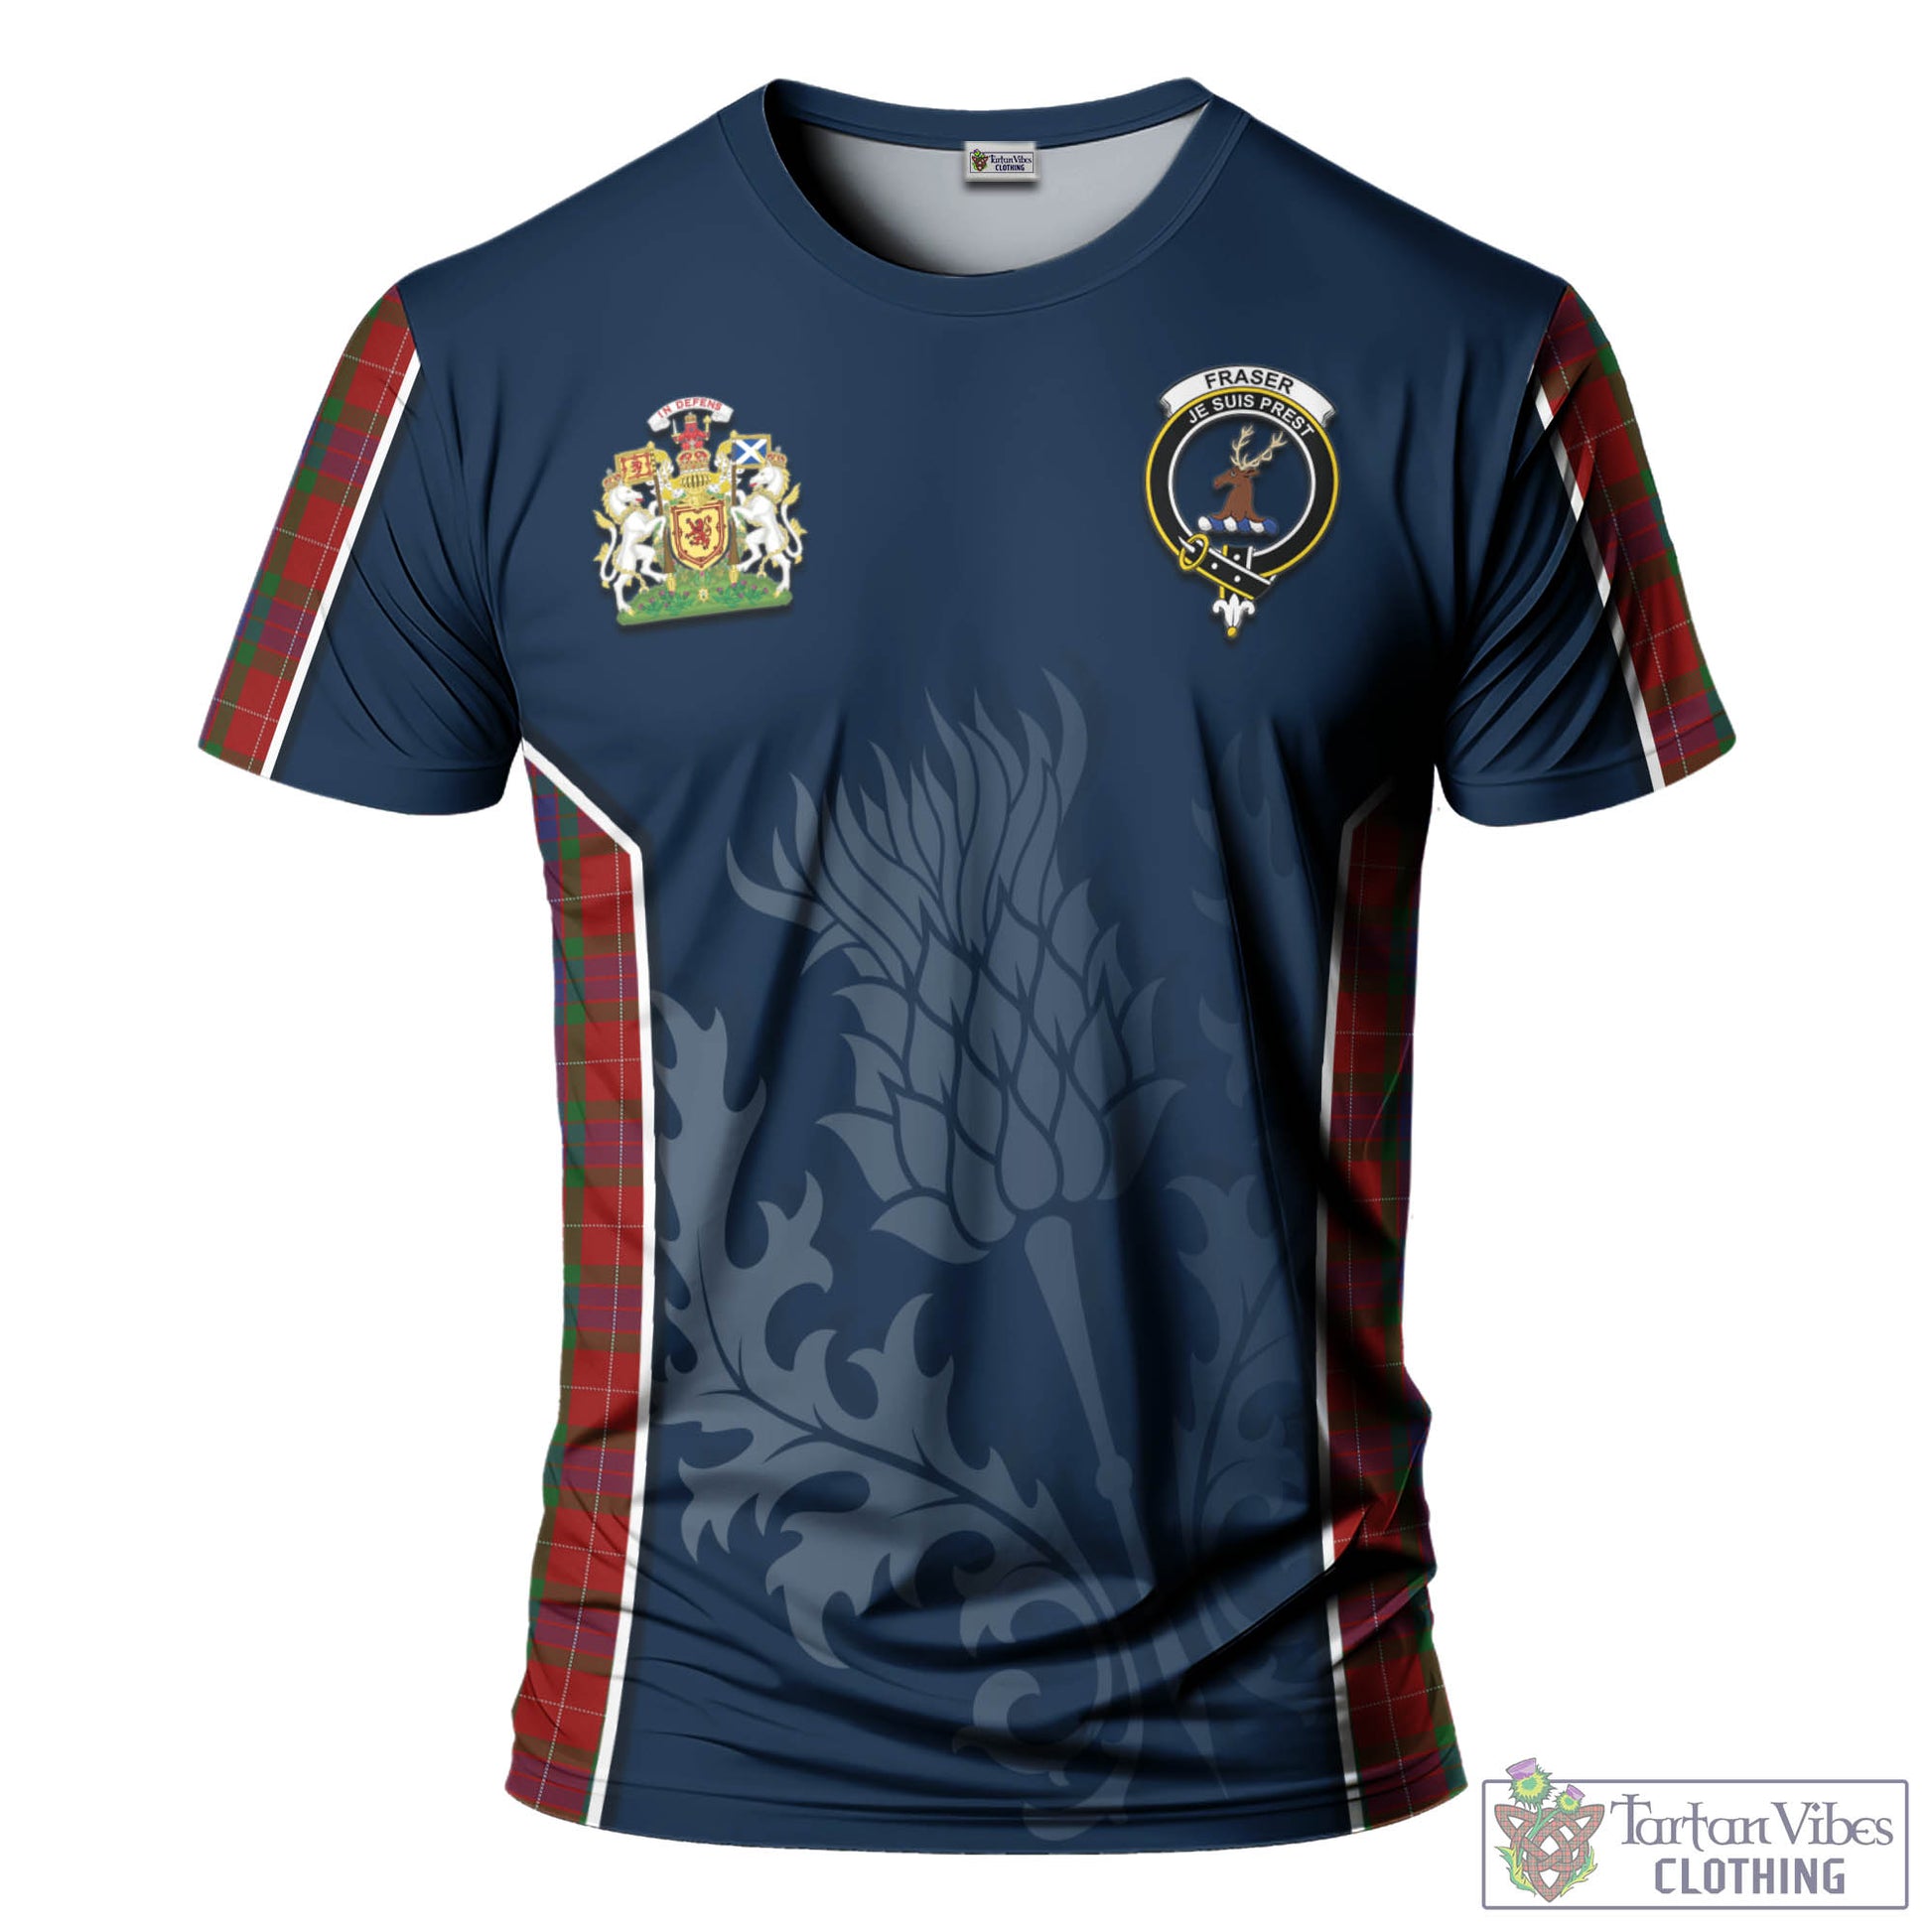 Tartan Vibes Clothing Fraser Tartan T-Shirt with Family Crest and Scottish Thistle Vibes Sport Style